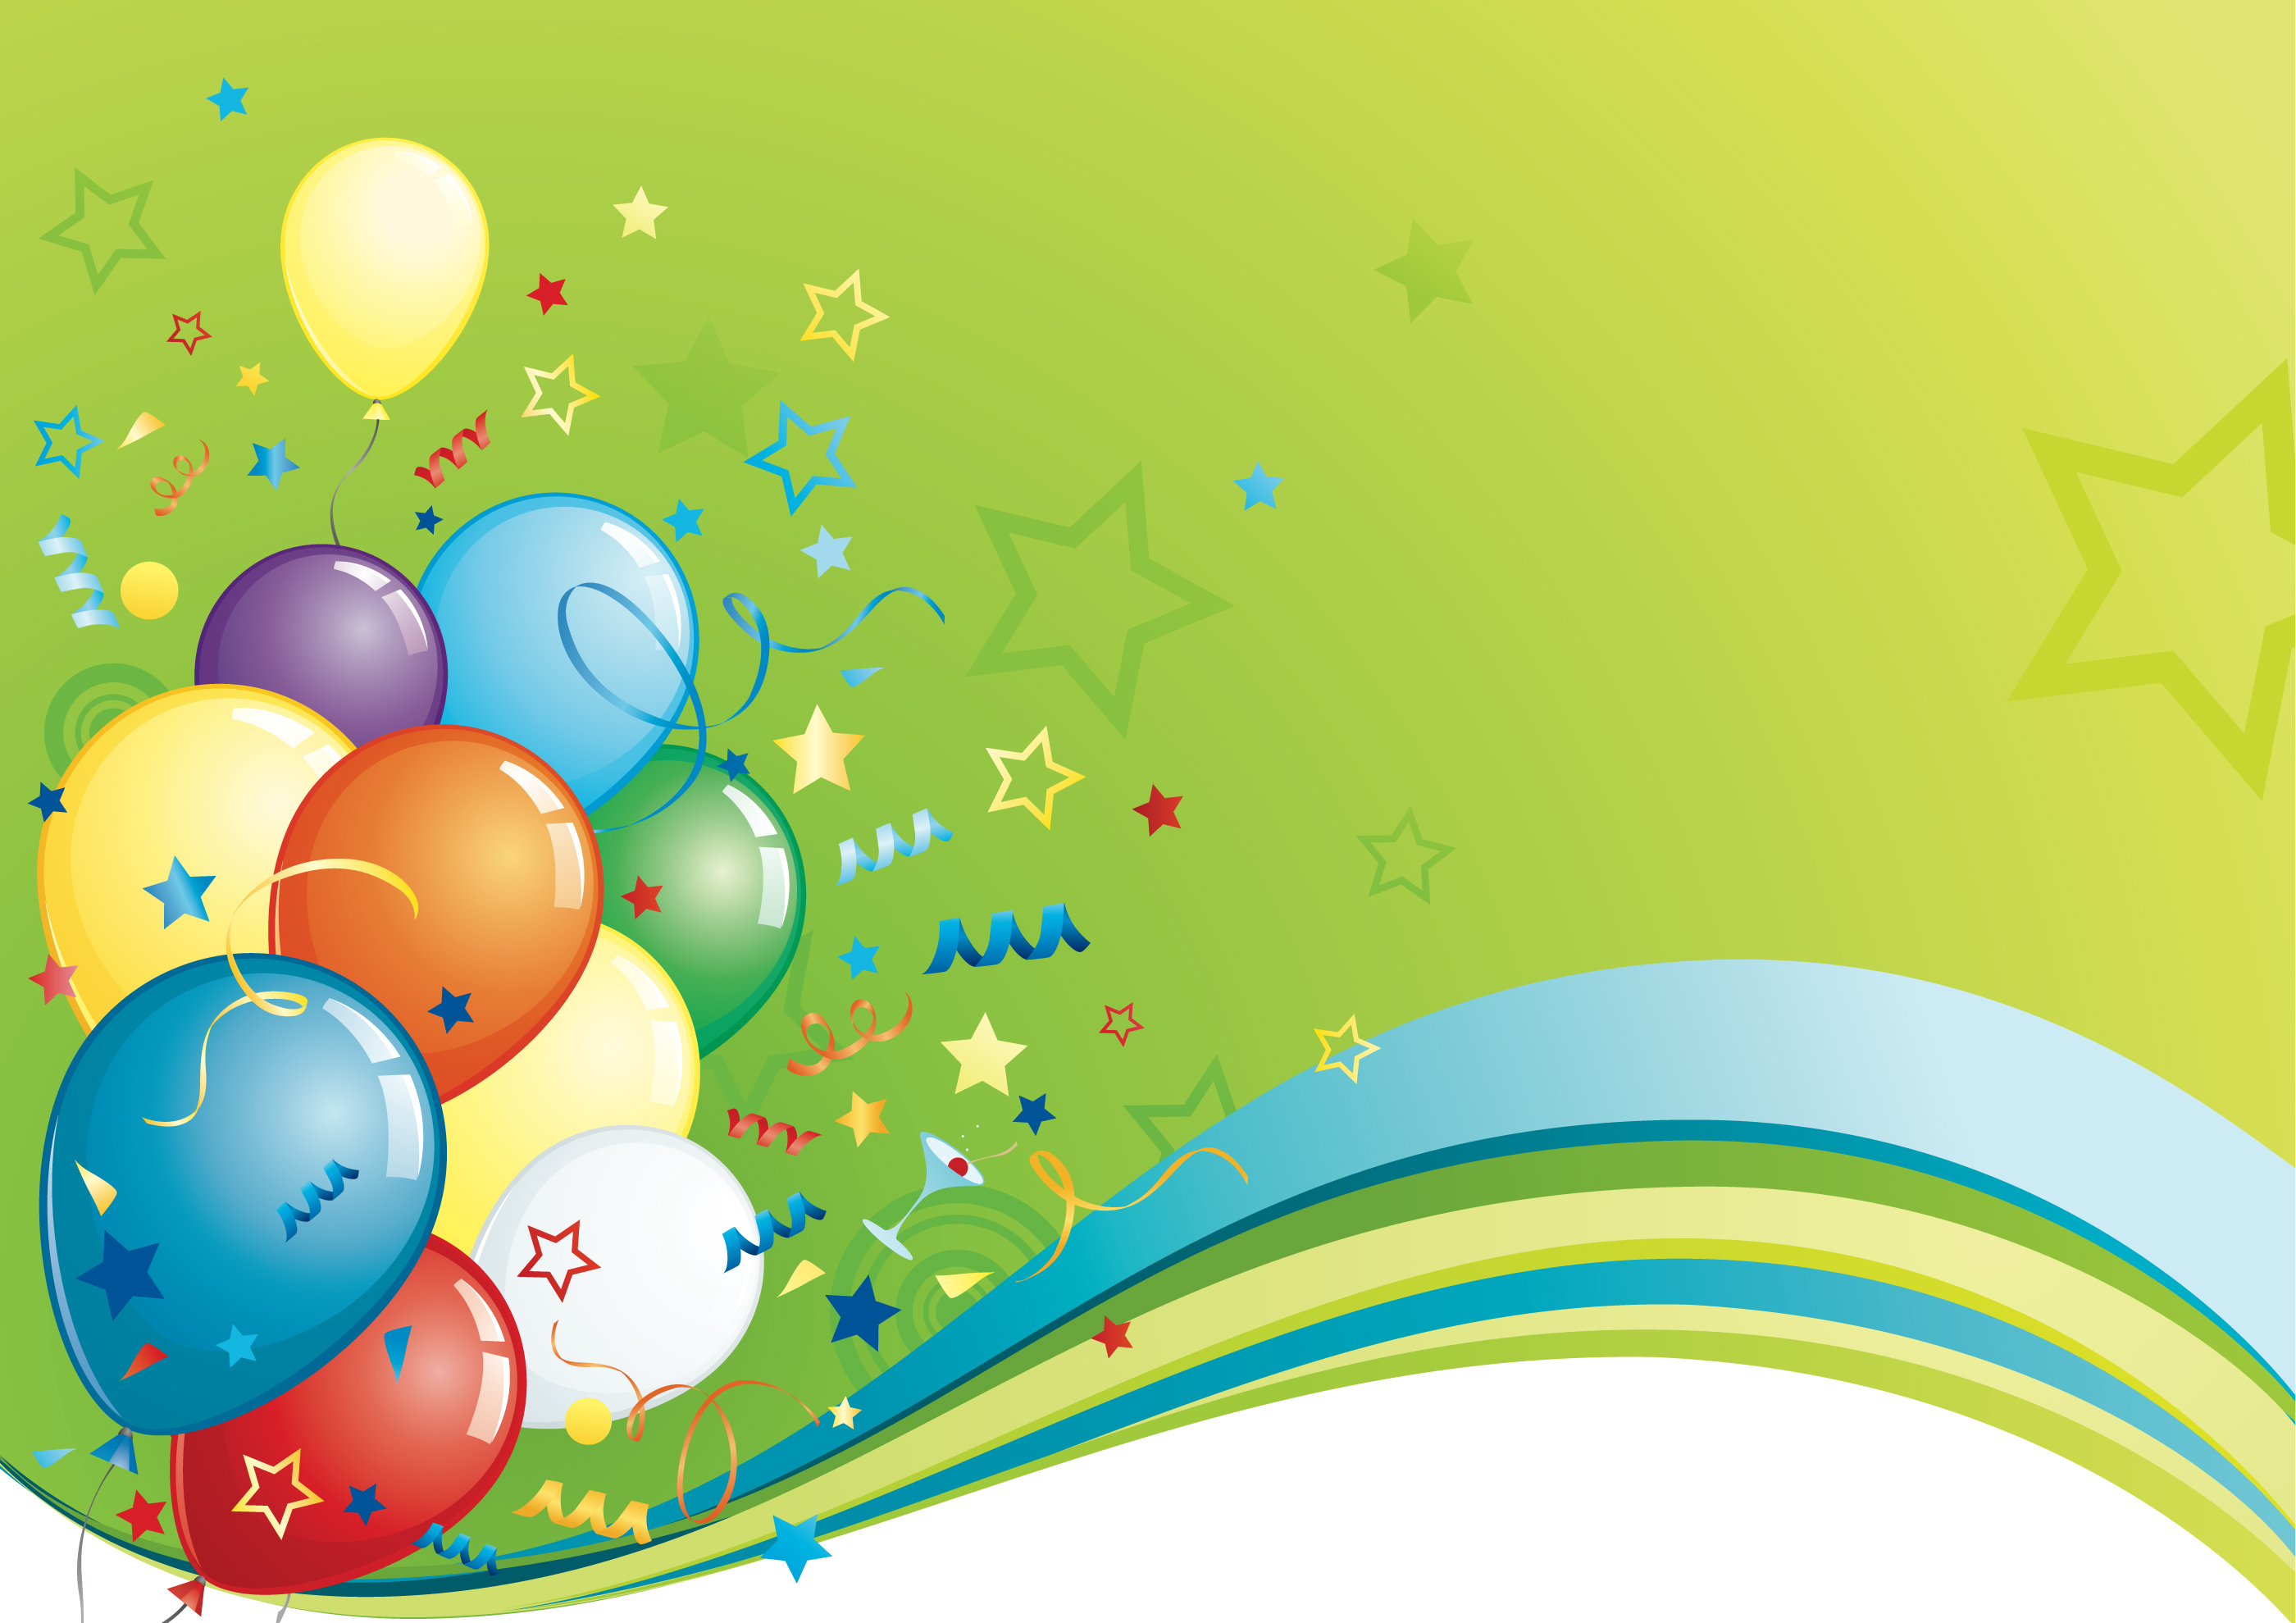 Birthday balloons wallpapers hd free wallapers | Chainimage